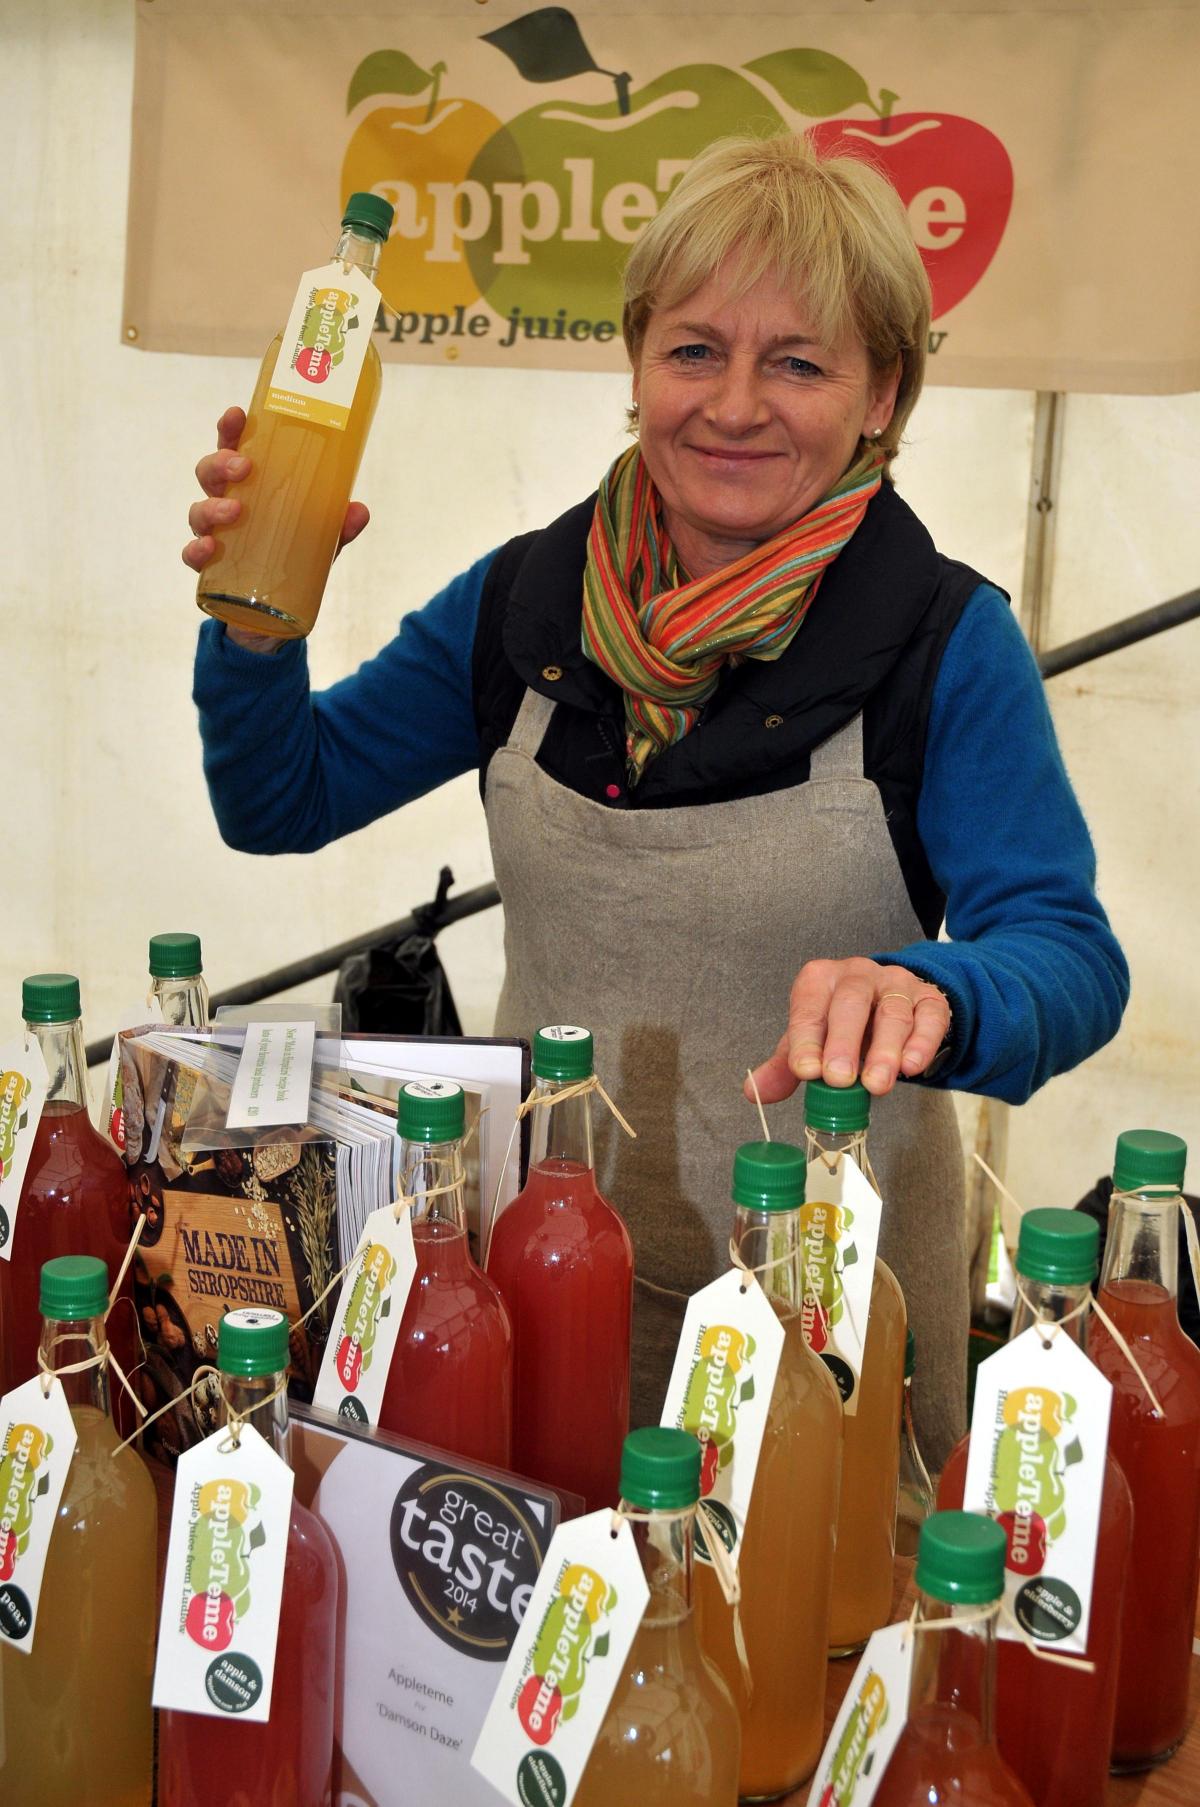 Jane Cullen from Apple Teme was offering a range of thirst quenching apple jhuice at Applefest